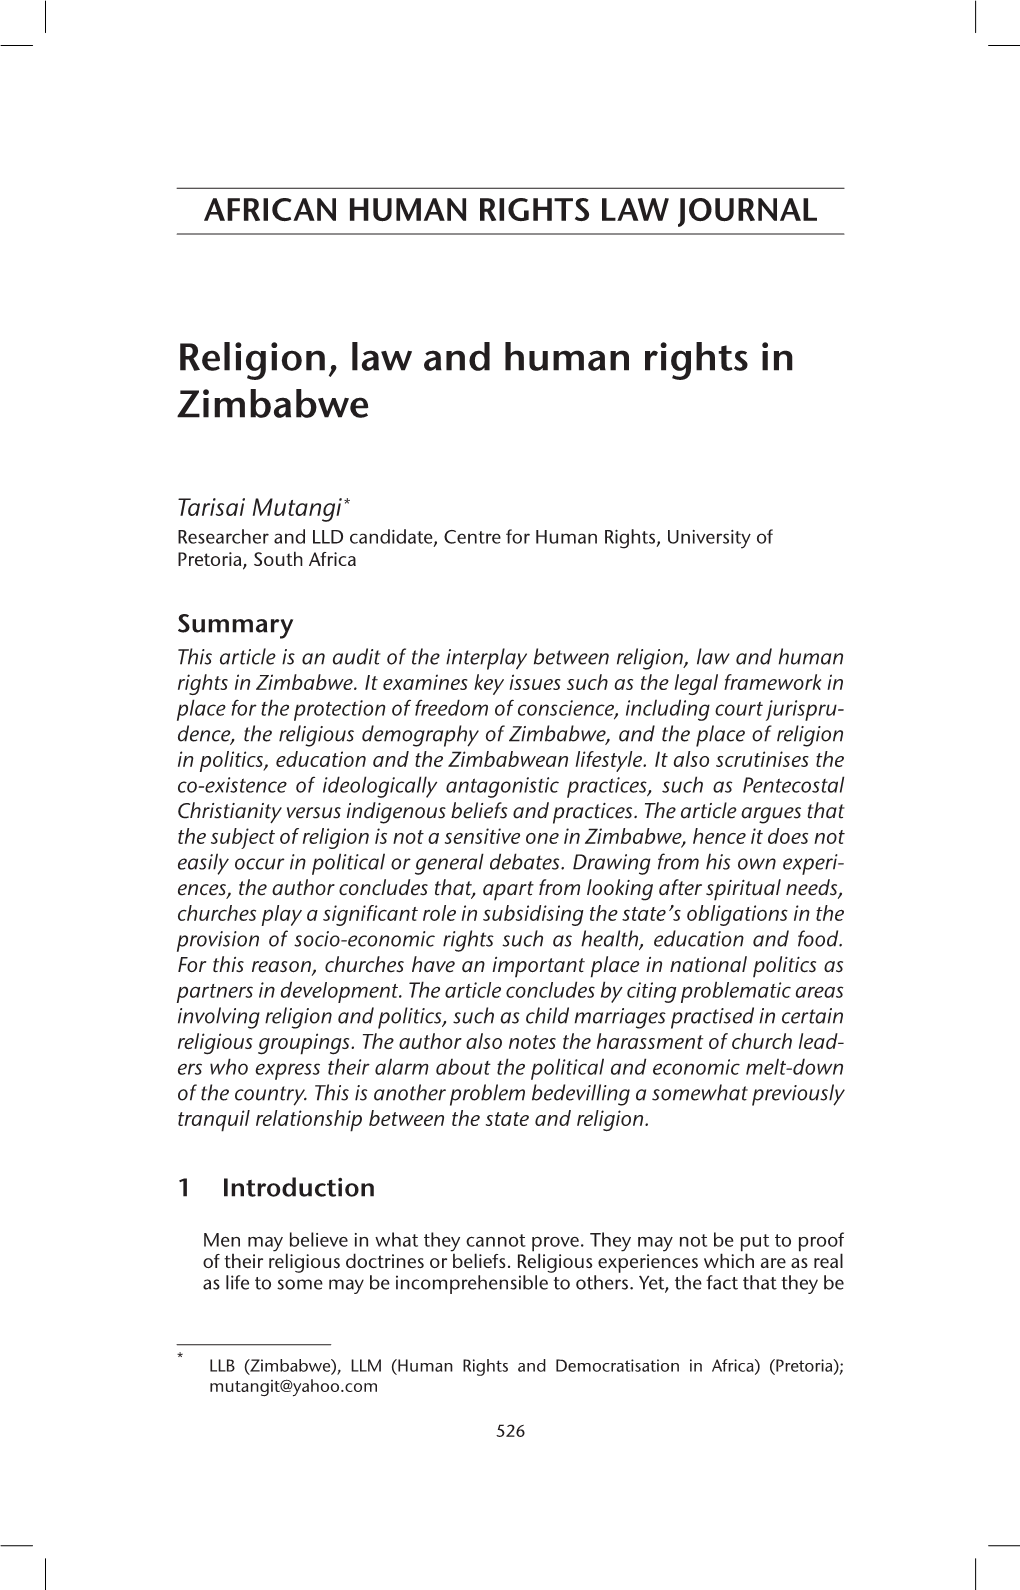 Religion, Law and Human Rights in Zimbabwe